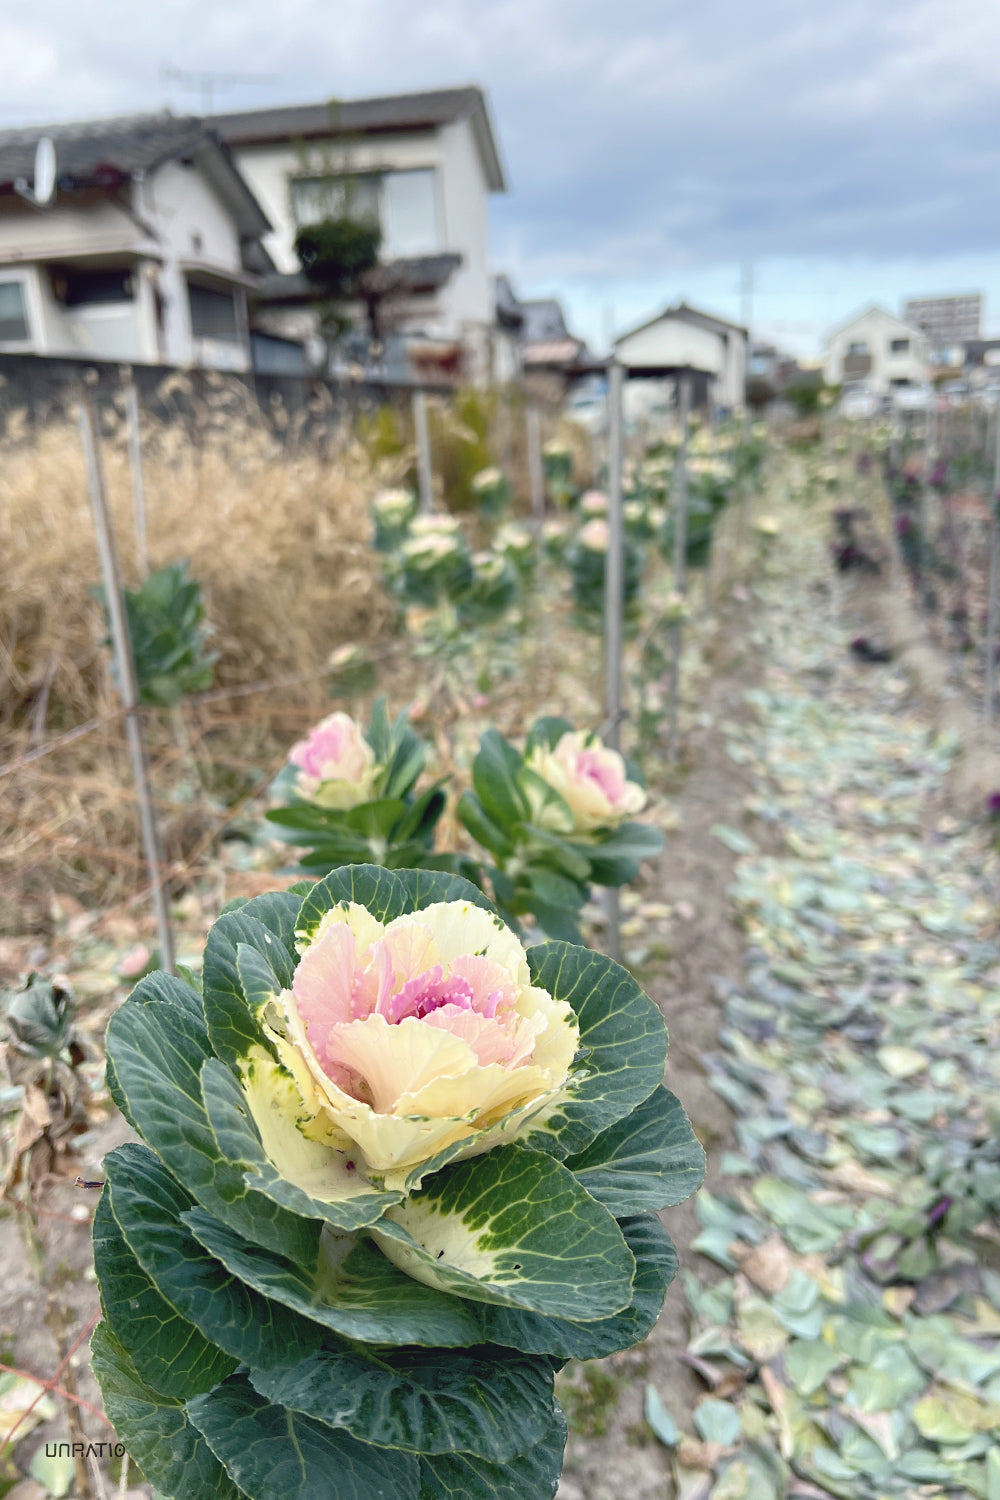 Foreground focus on a pale pink and cream ornamental cabbage in a Japanese garden, with a soft blur of urban houses in the background.